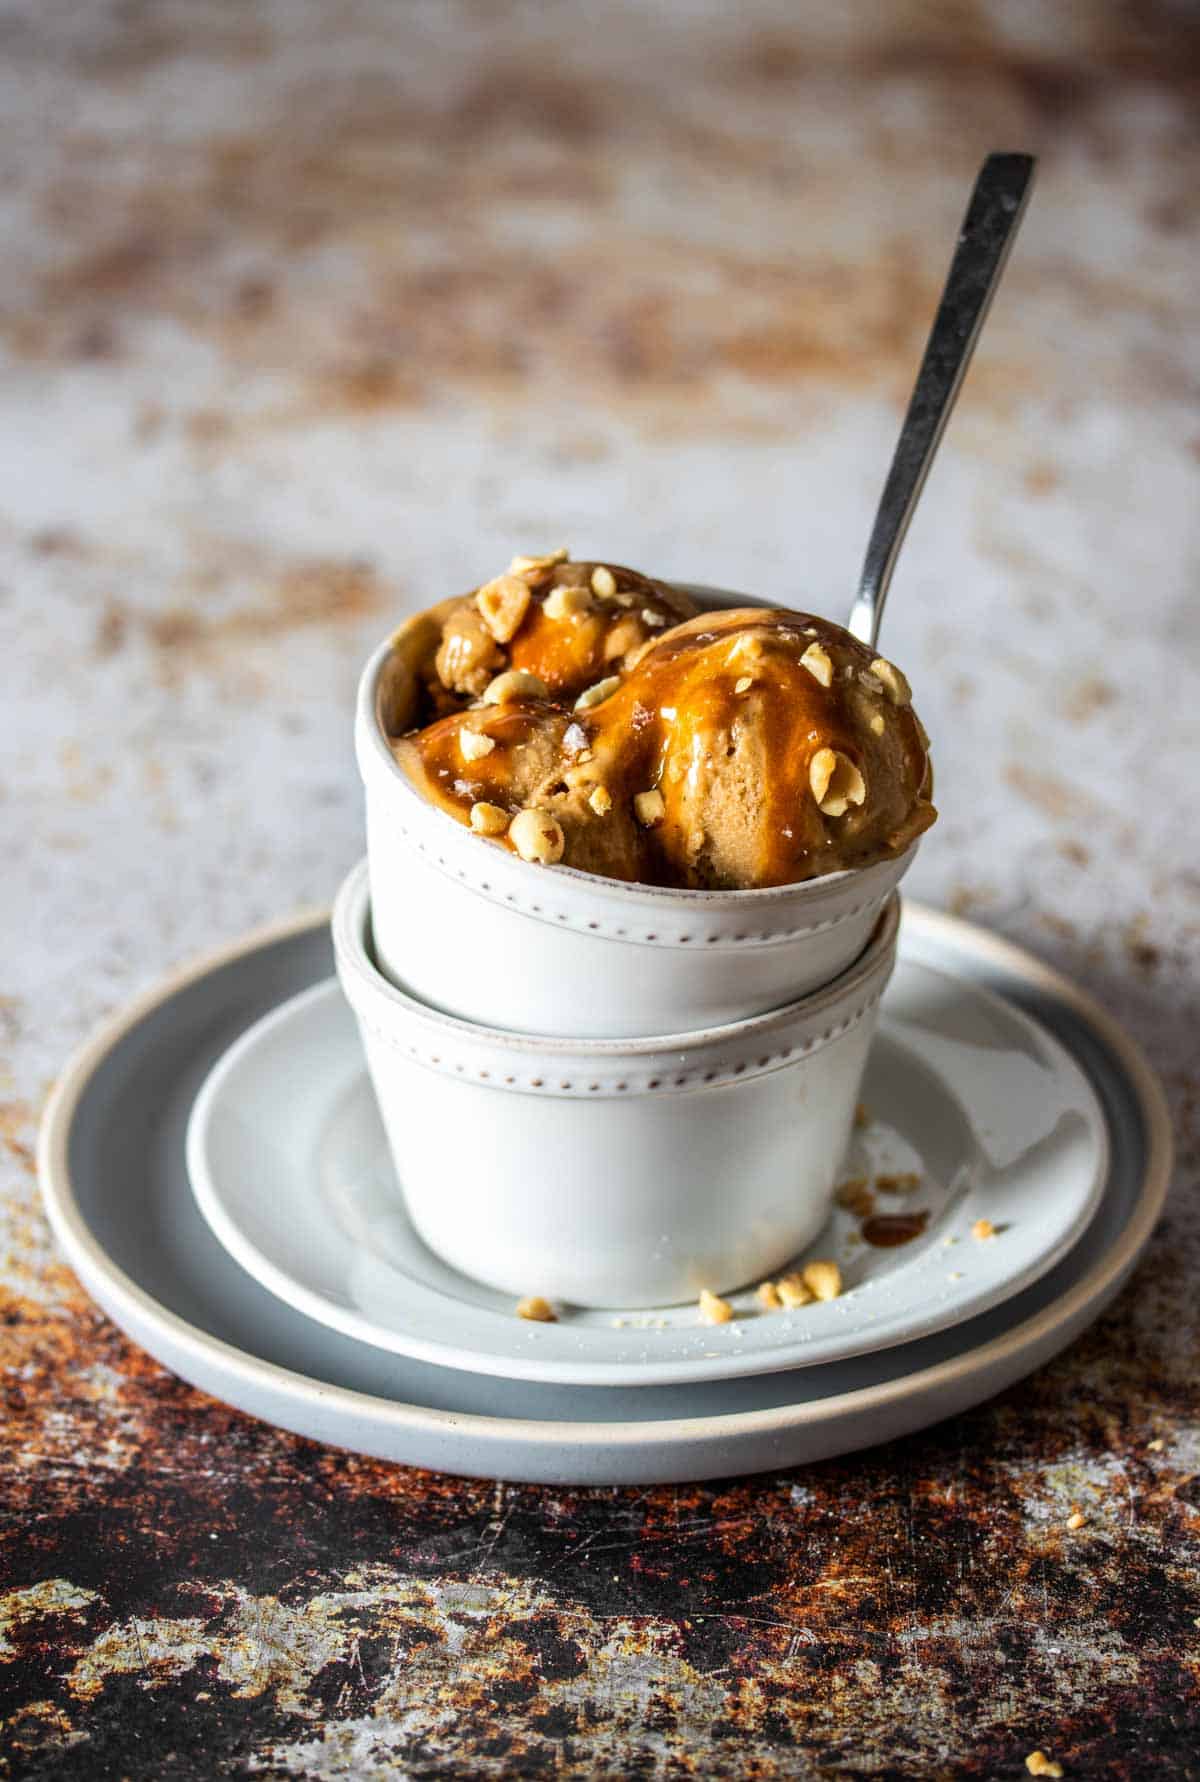 A spoon in a white bowl filled with peanut butter ice cream scoops topped with caramel and peanuts.